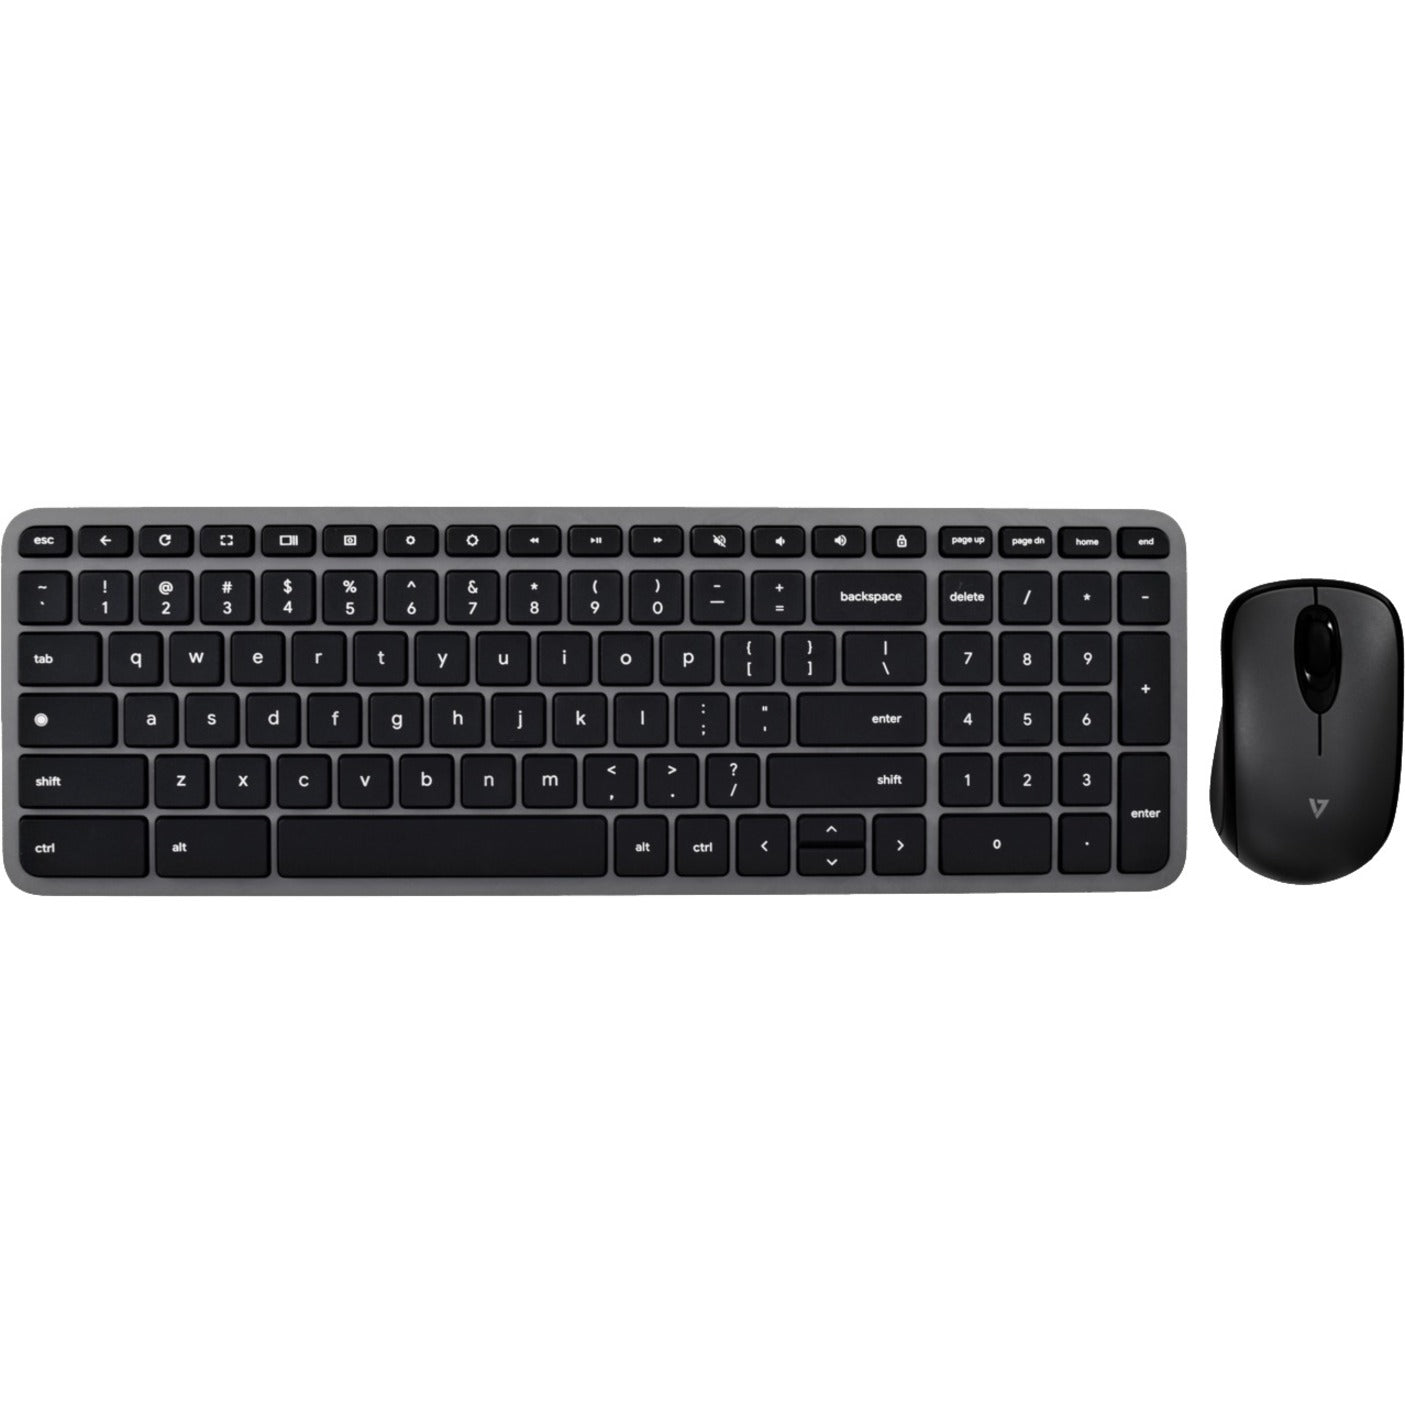 V7 CKW150BTUS Bluetooth Keyboard and Mouse Combo Chromebook Edition, 2 Year Warranty, Wear Resistant, Numeric Keypad